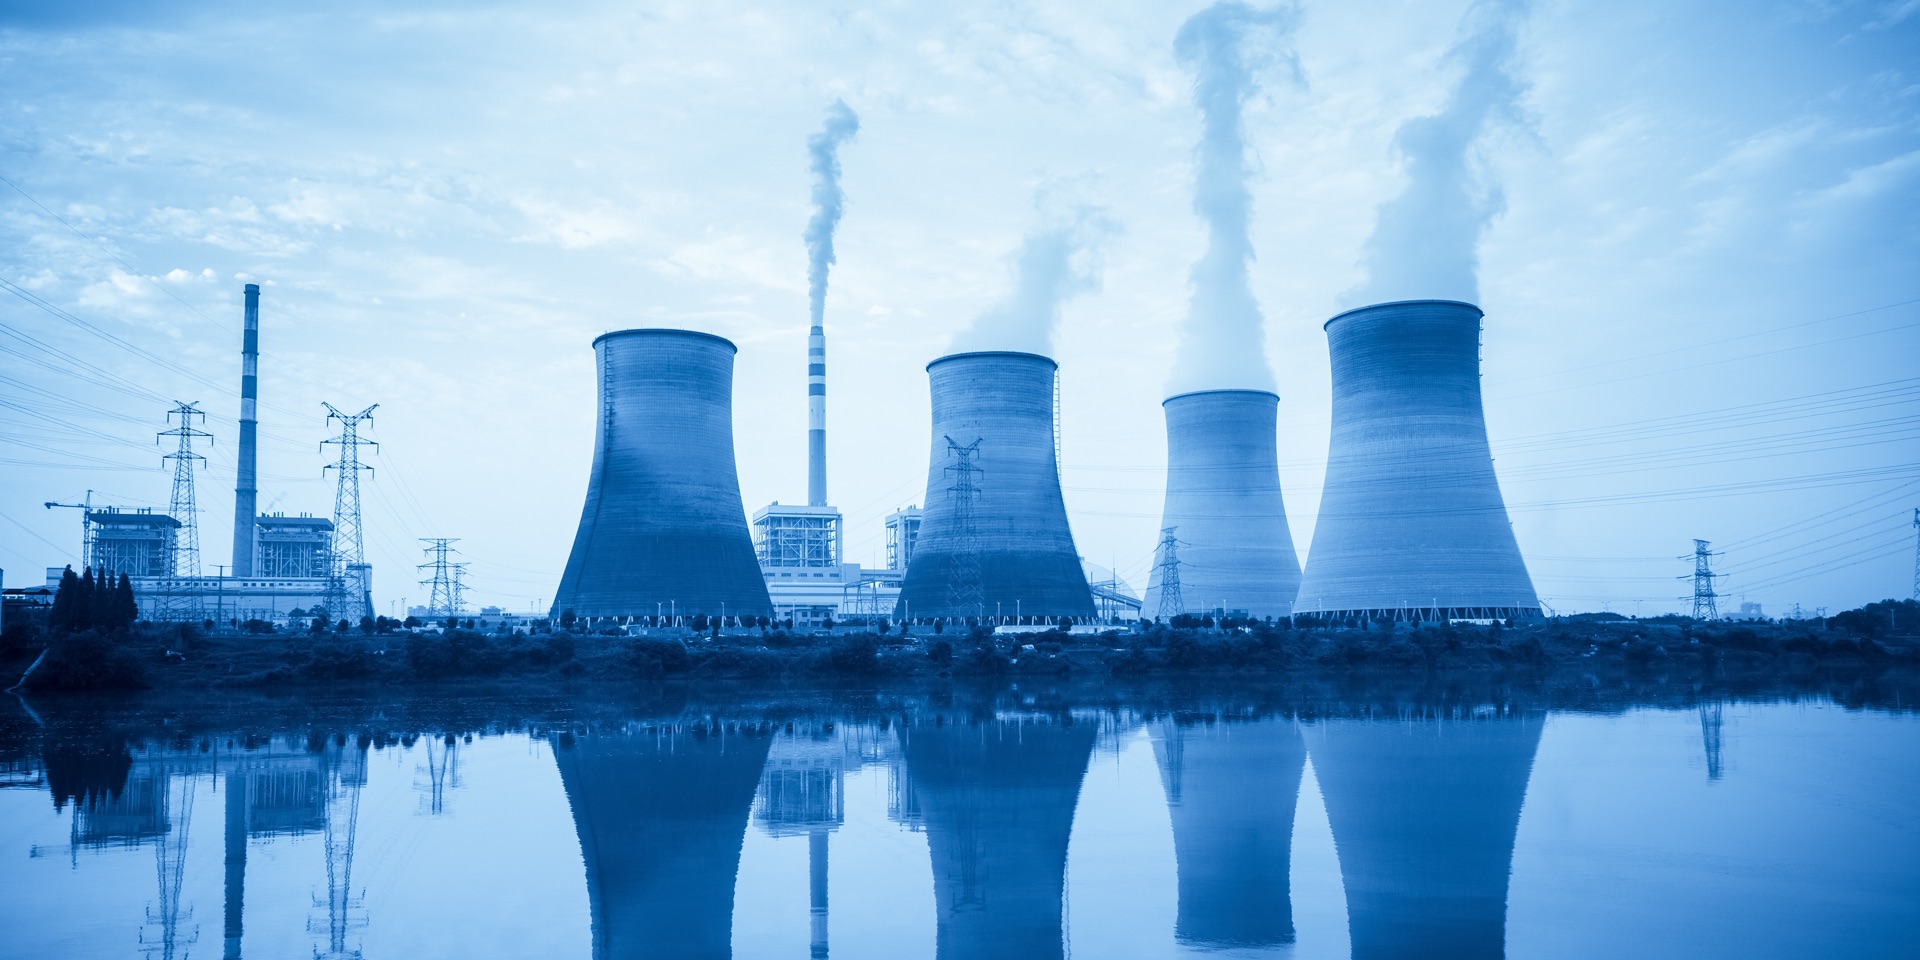 Predicting Vibration Crises in Nuclear Power Plants